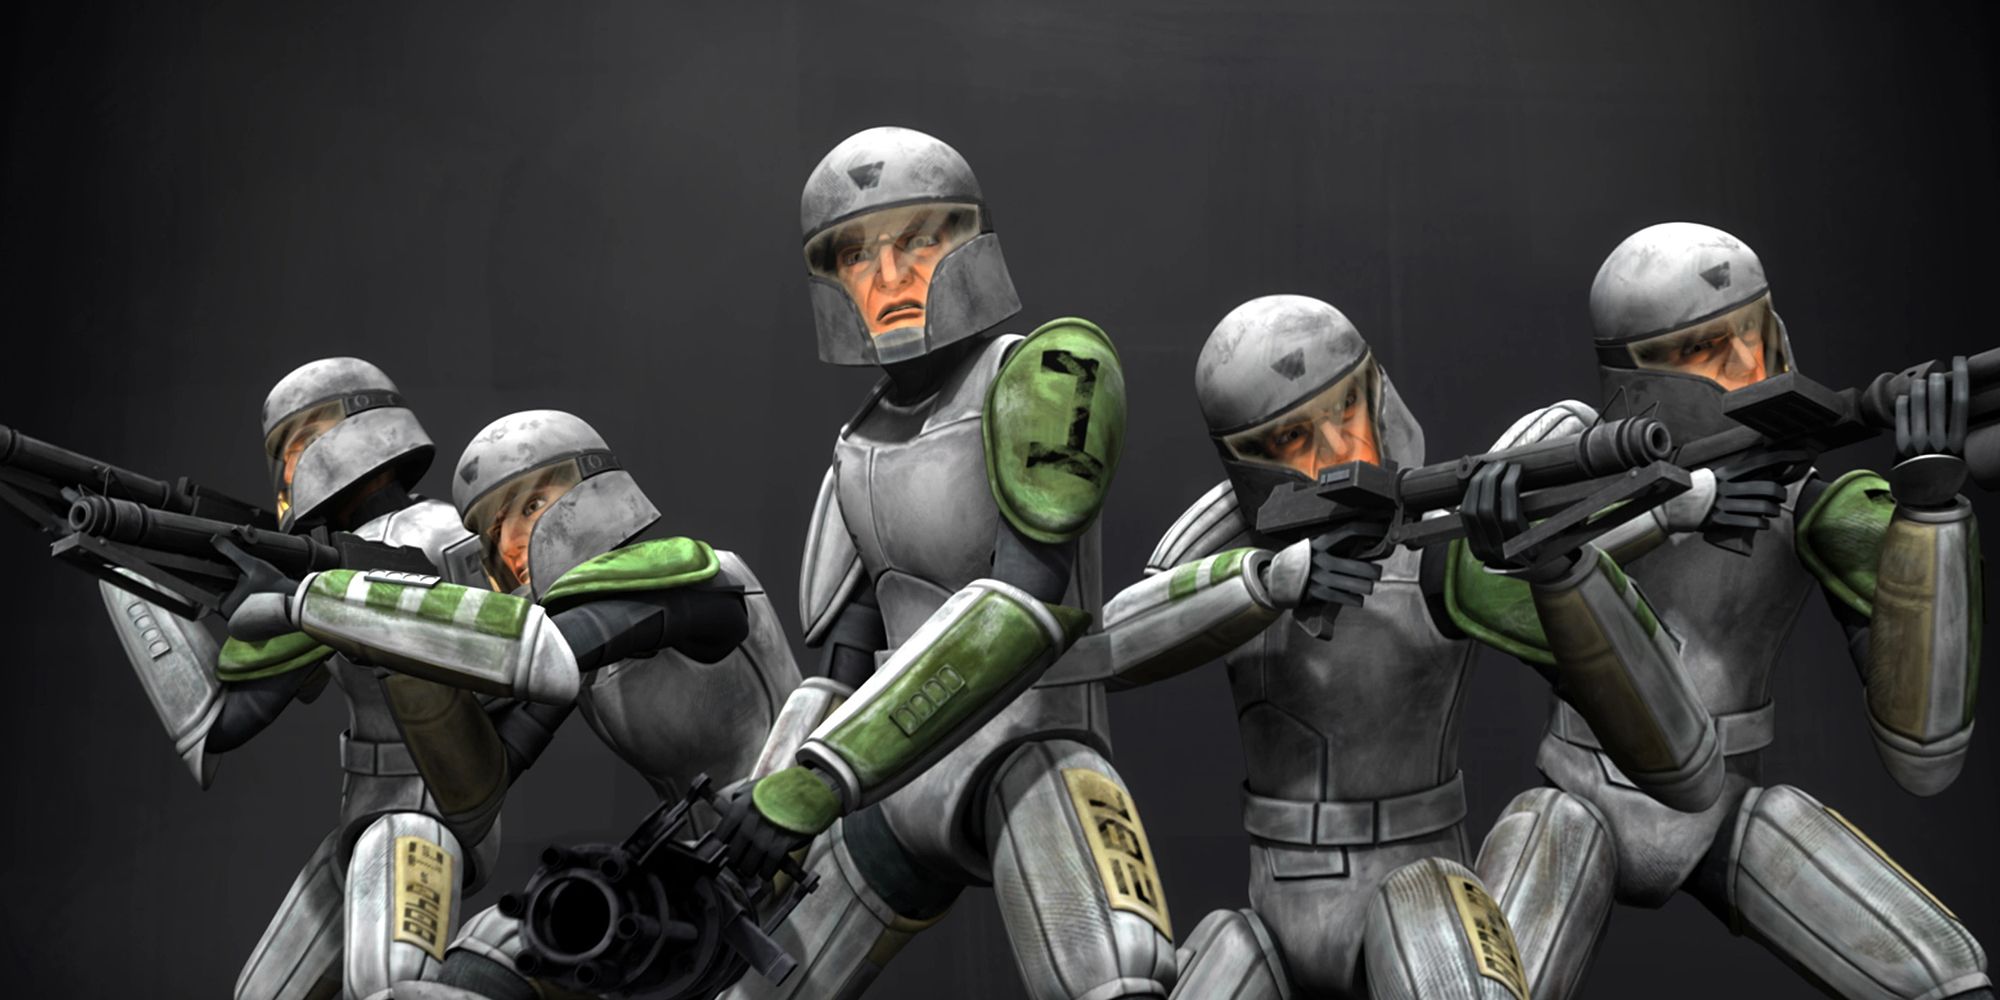 Clone Cadet Troopers In Star Wars: The Clone Wars